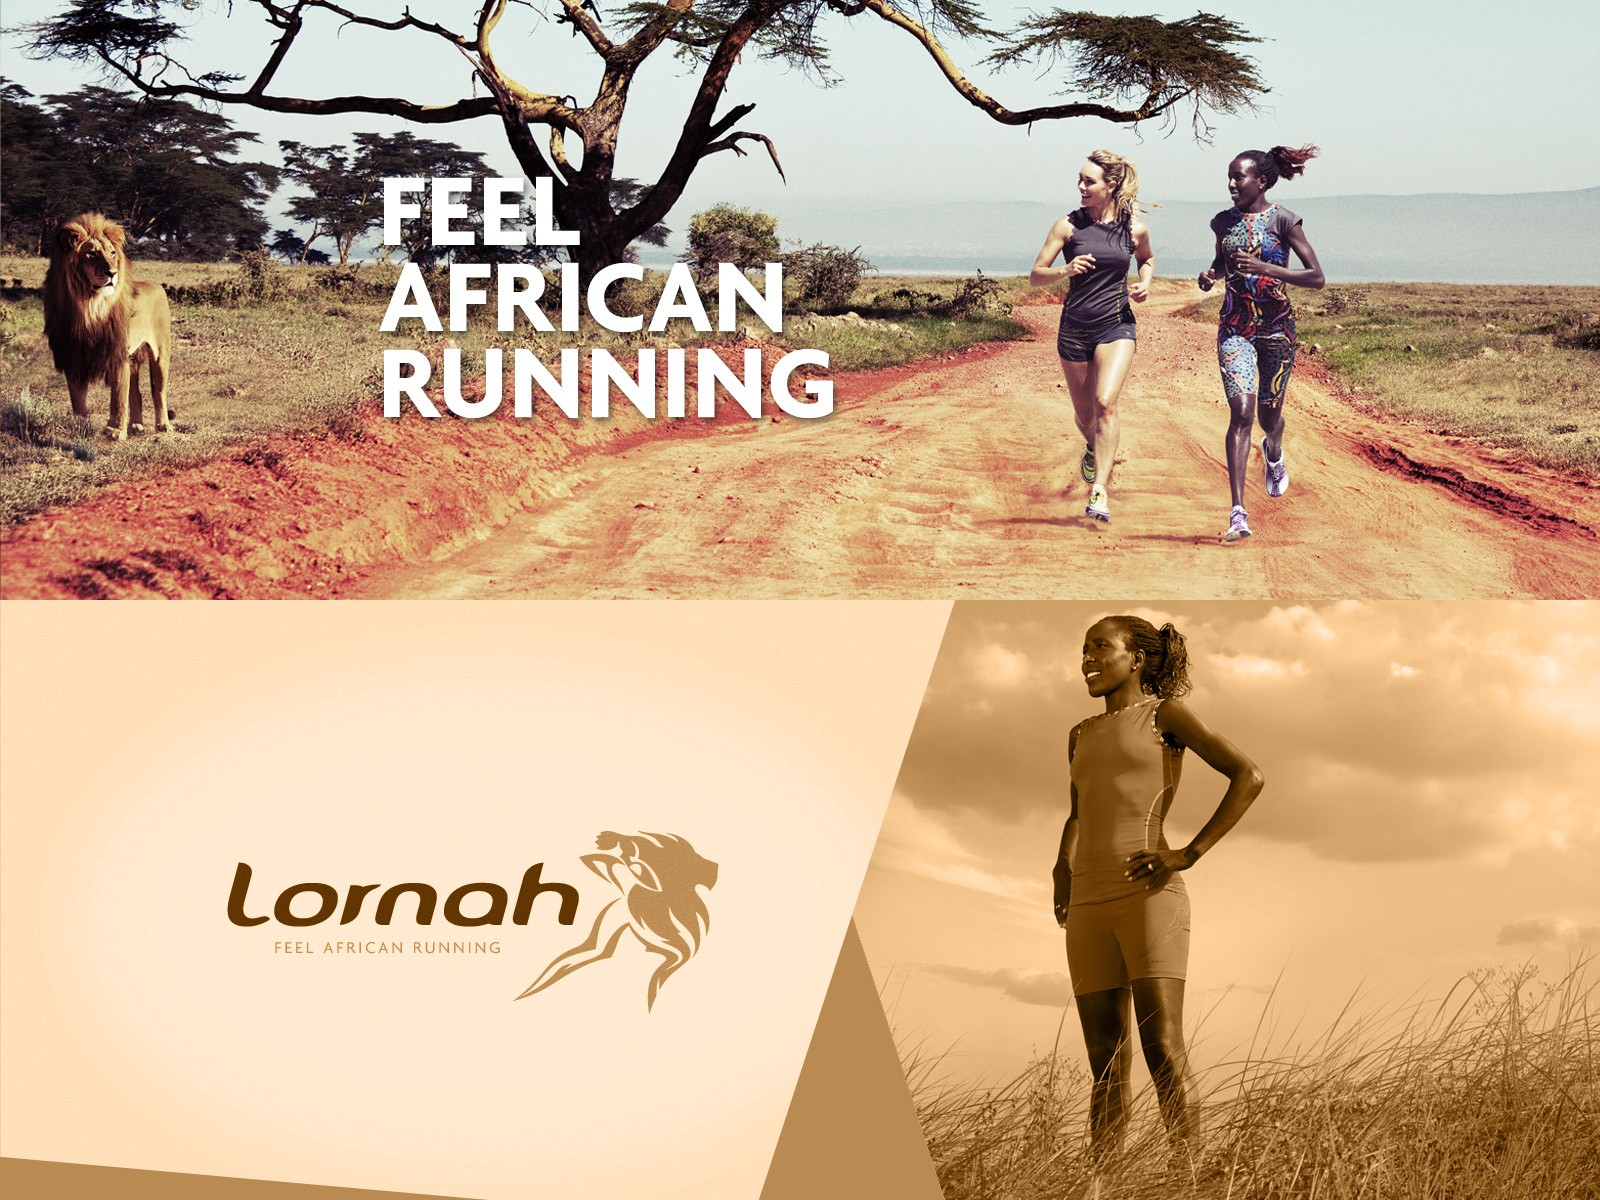 Lornah Kiplagat runs with her own apparel brandwear - 'Lornah' for active women / Photo Credit: Lornahsports.com